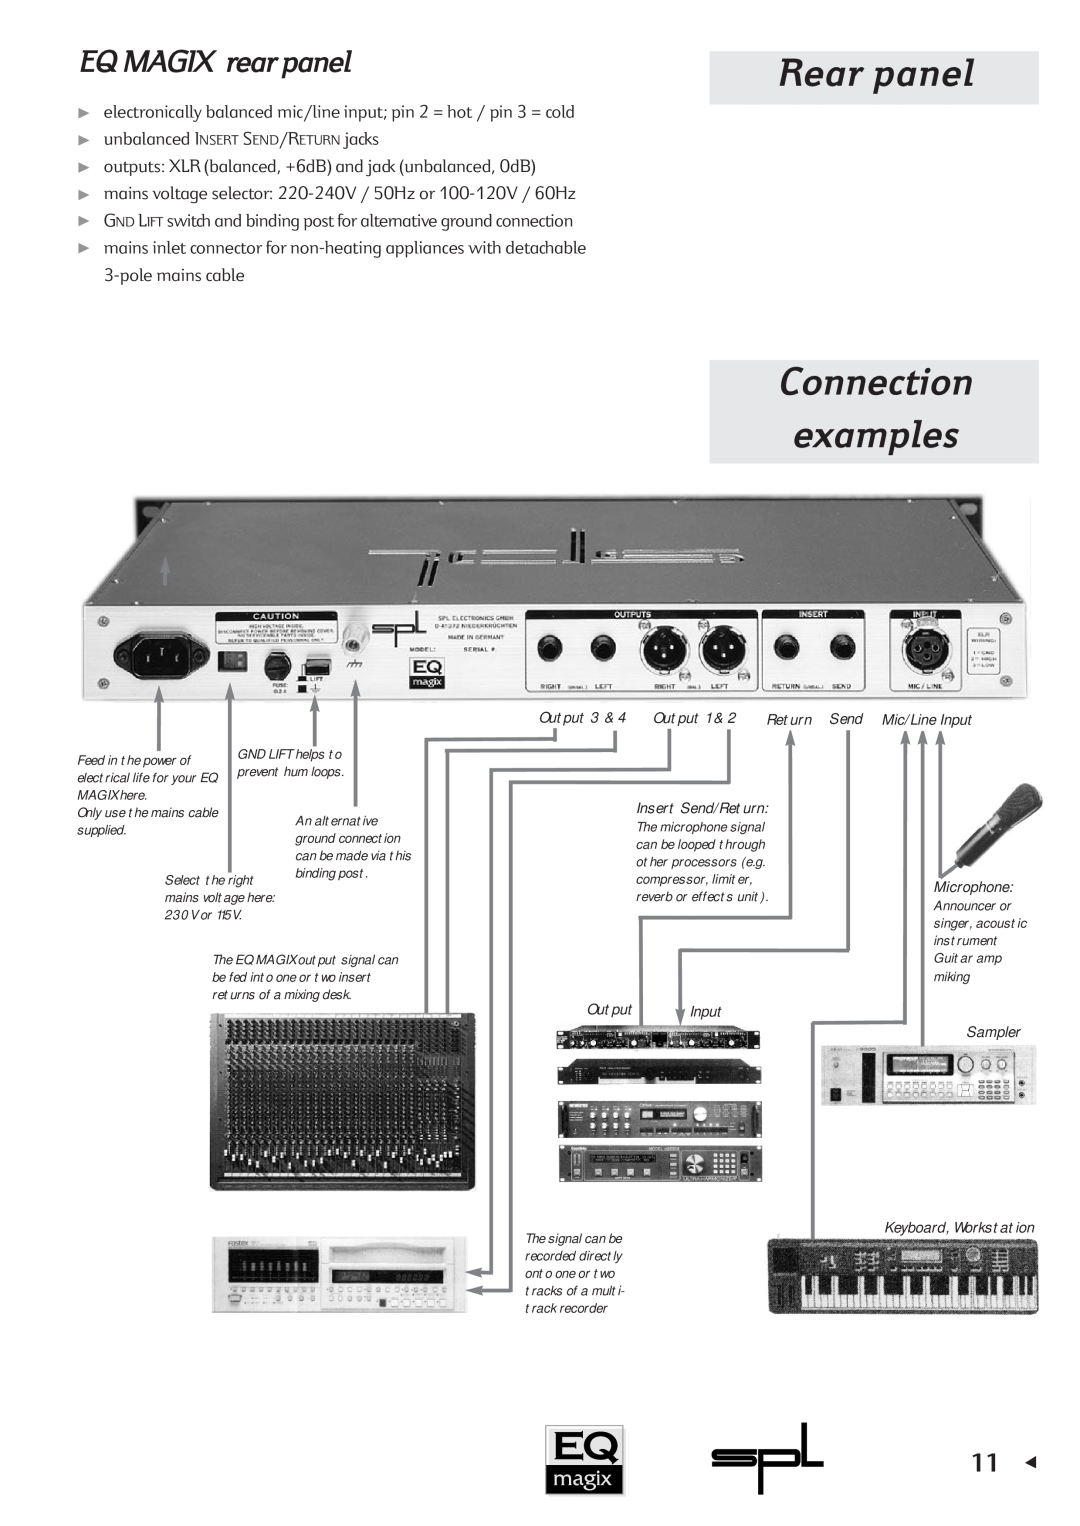 Sound Performance Lab manual Rear panel, Connection examples, EQ MAGIX rear panel 